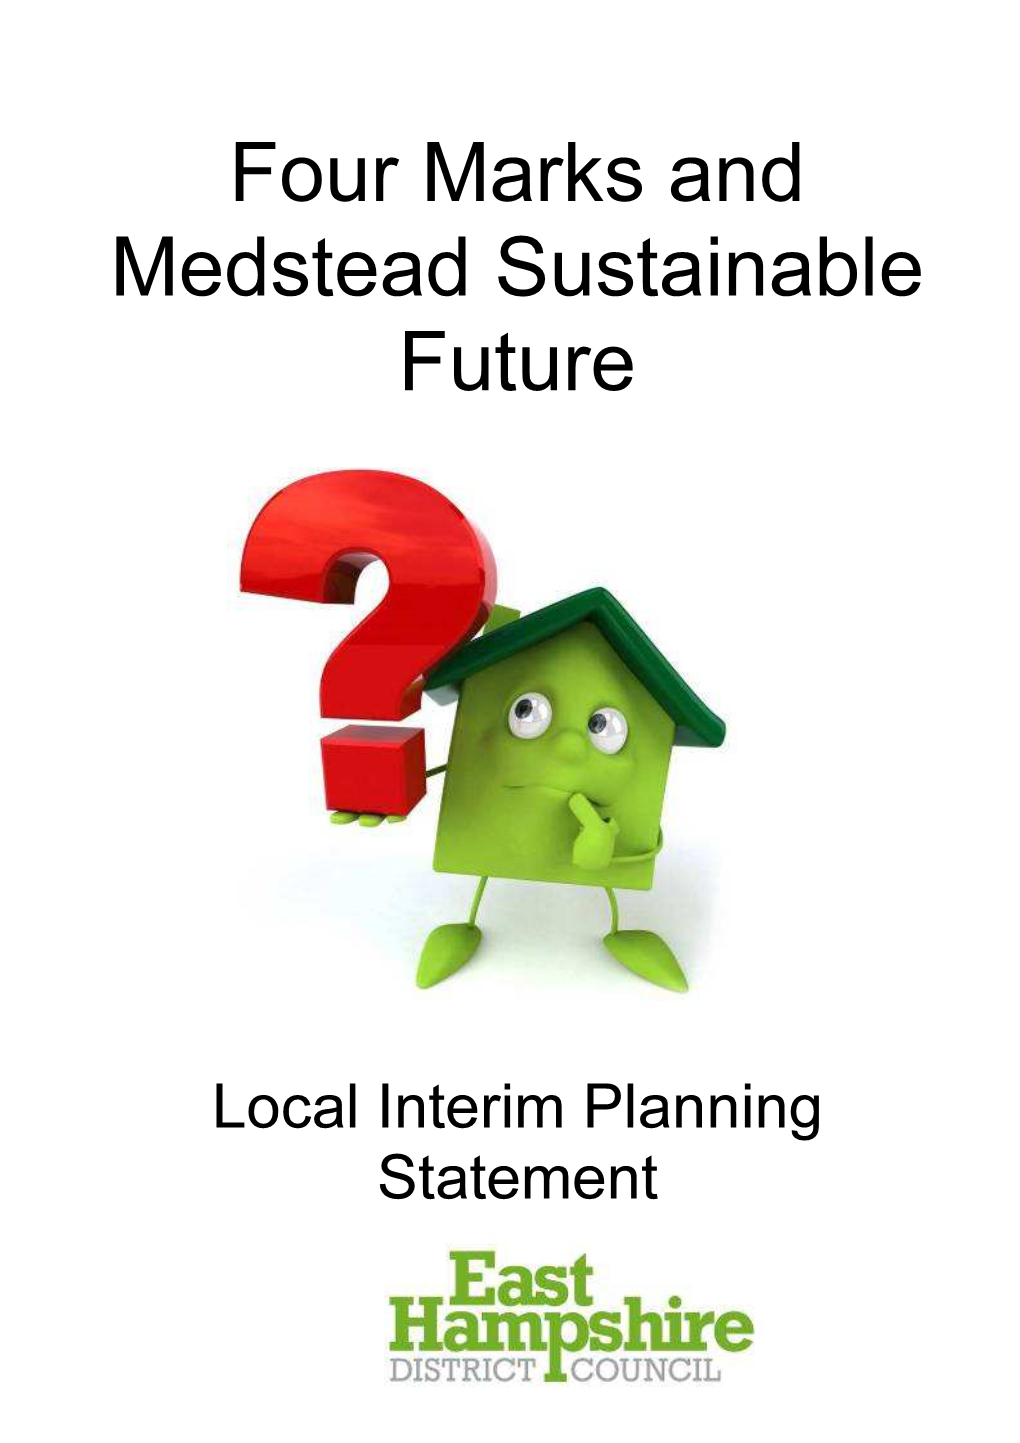 Four Marks and Medstead Sustainable Future